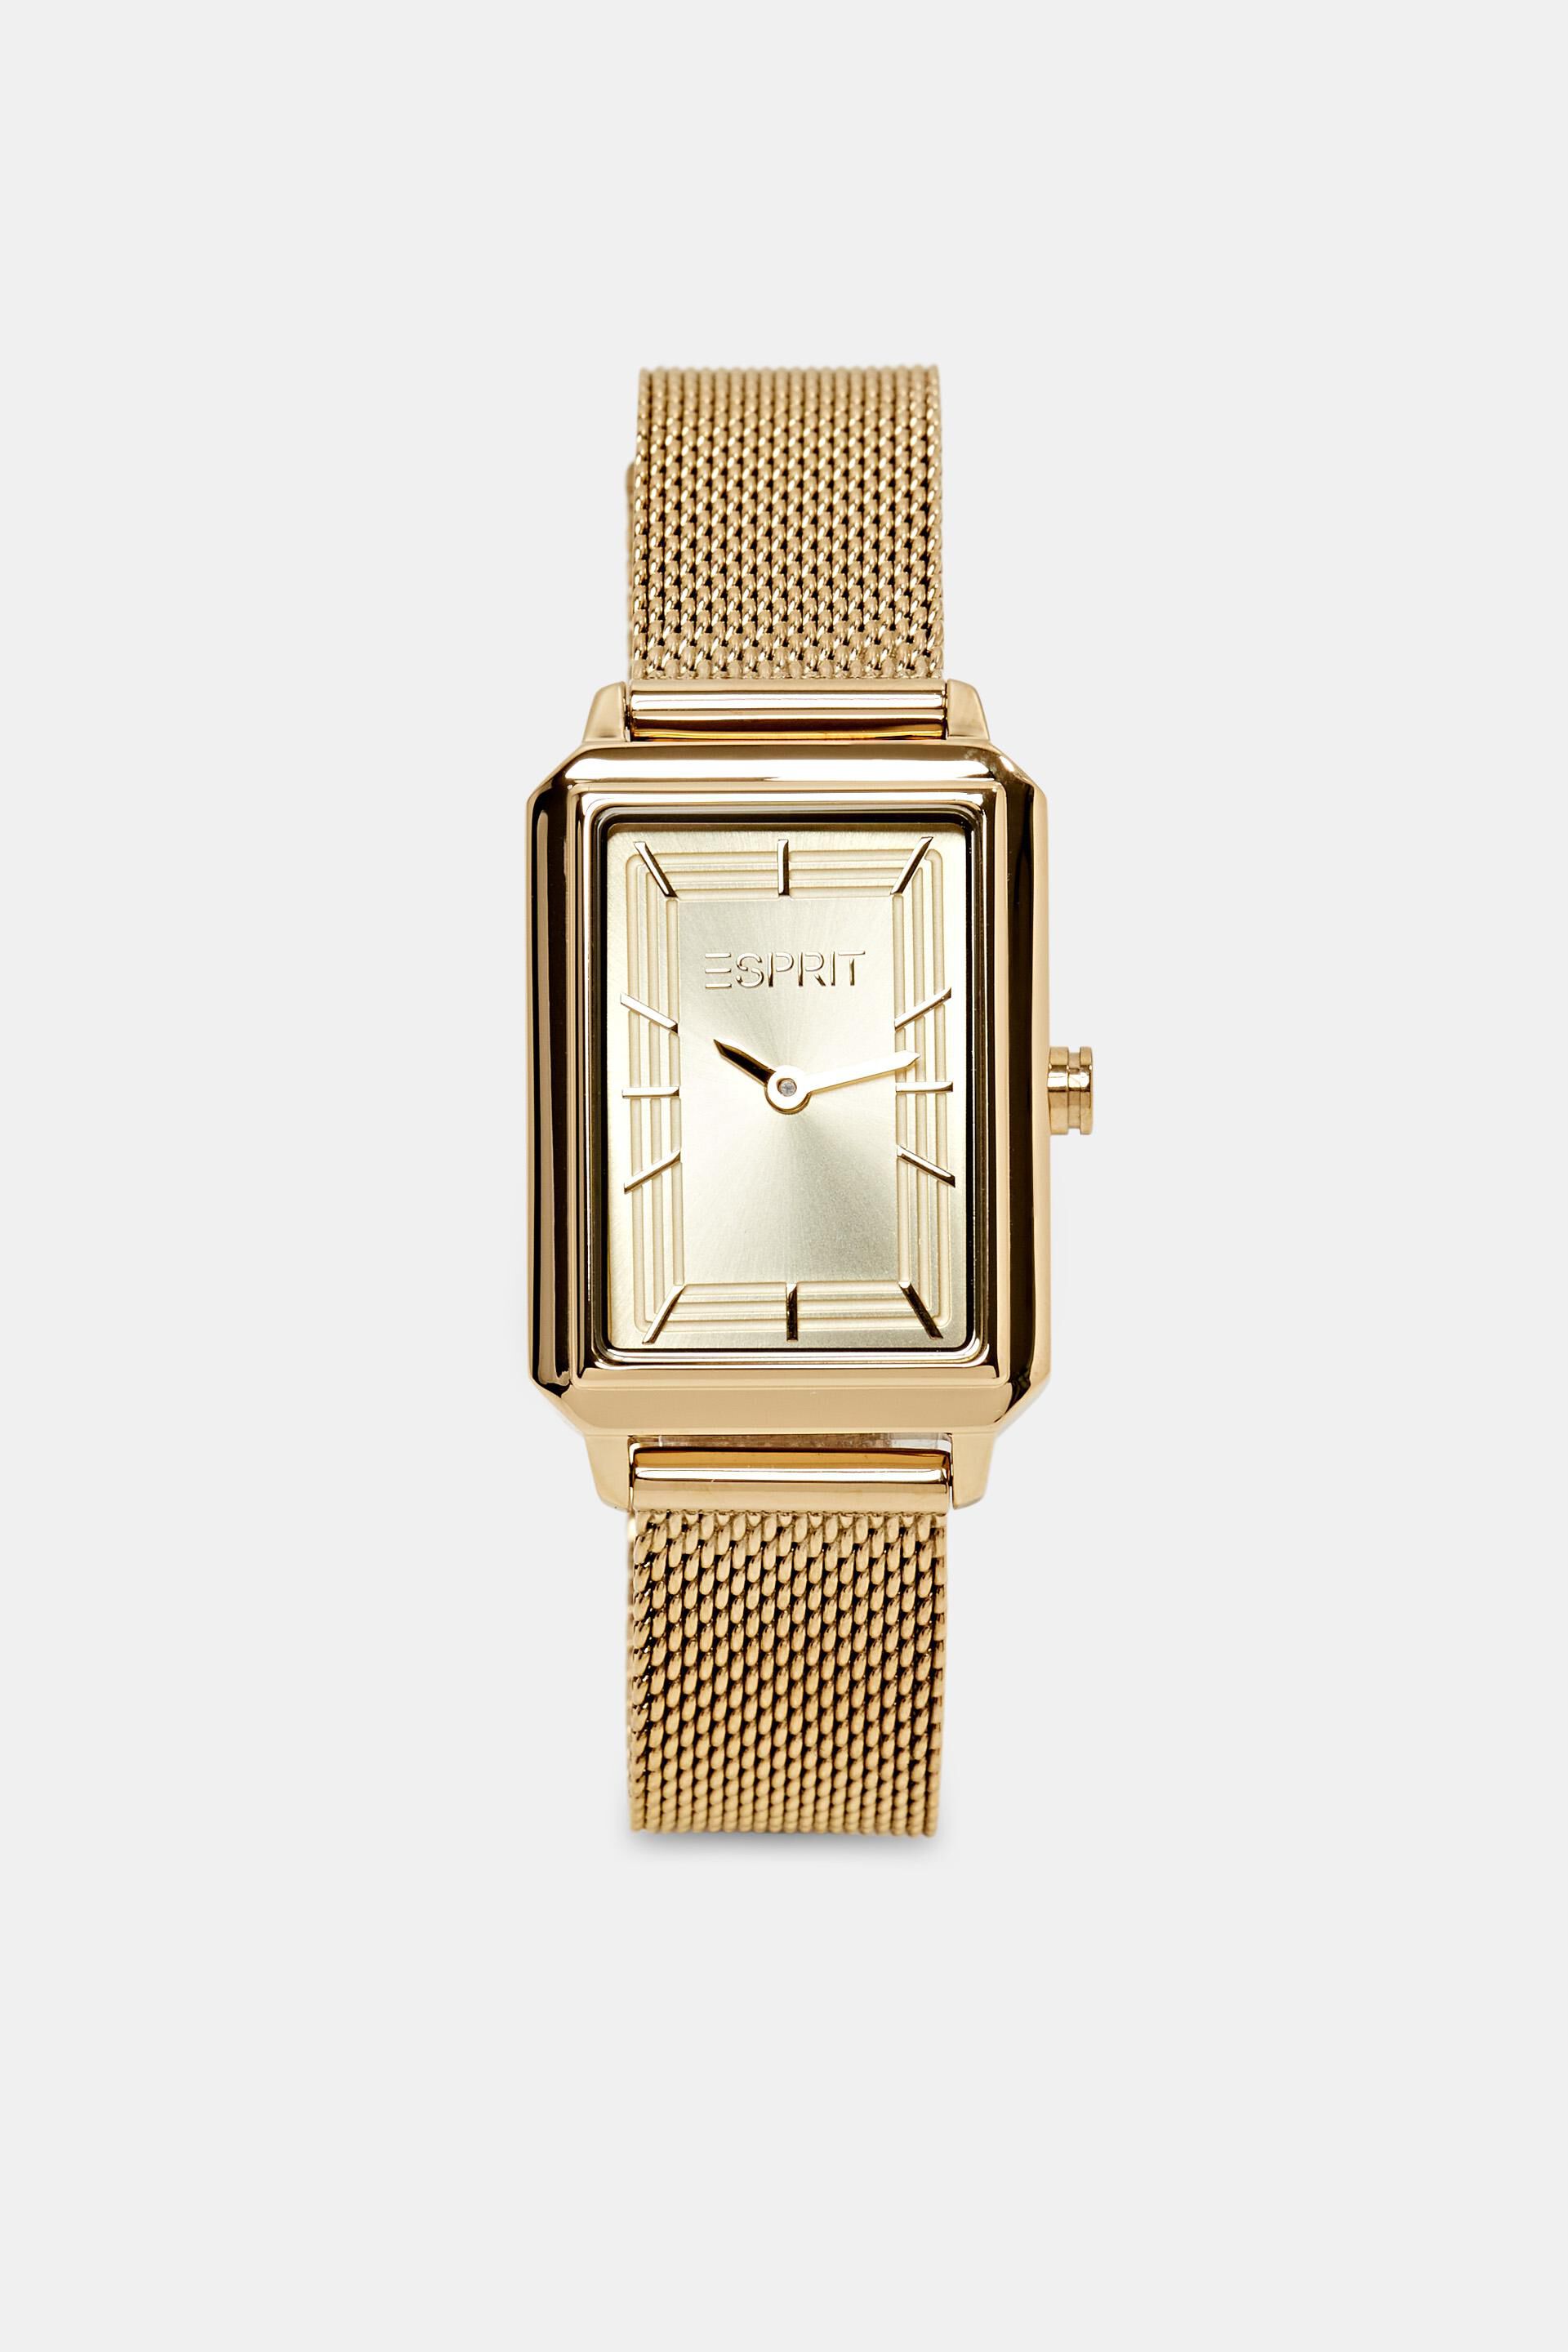 Esprit Online Store Square-shaped watch with a mesh strap